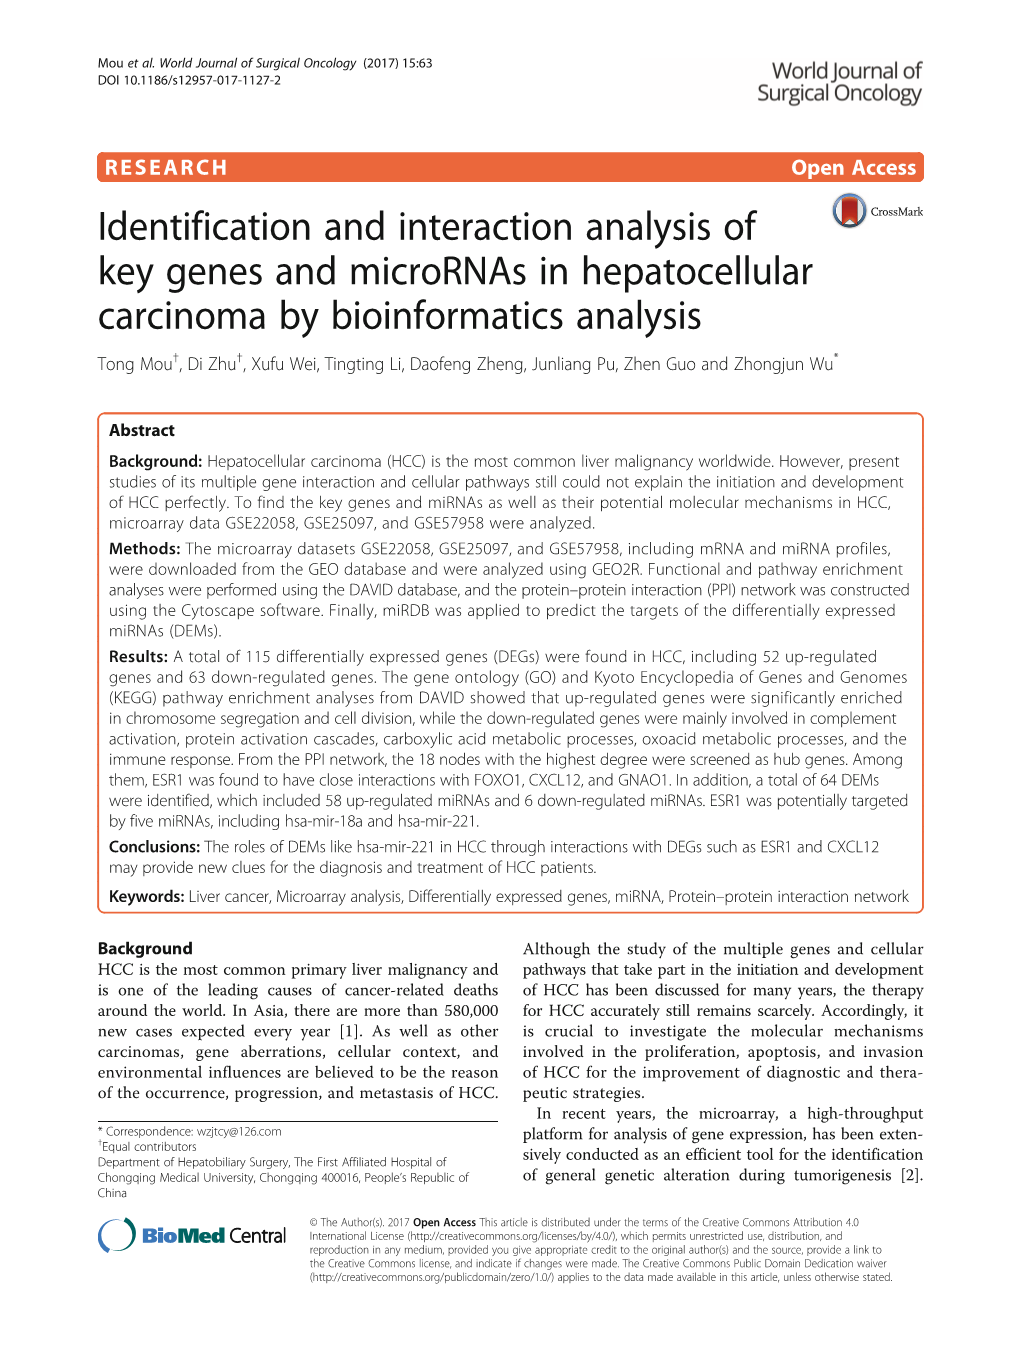 Identification and Interaction Analysis of Key Genes and Micrornas In